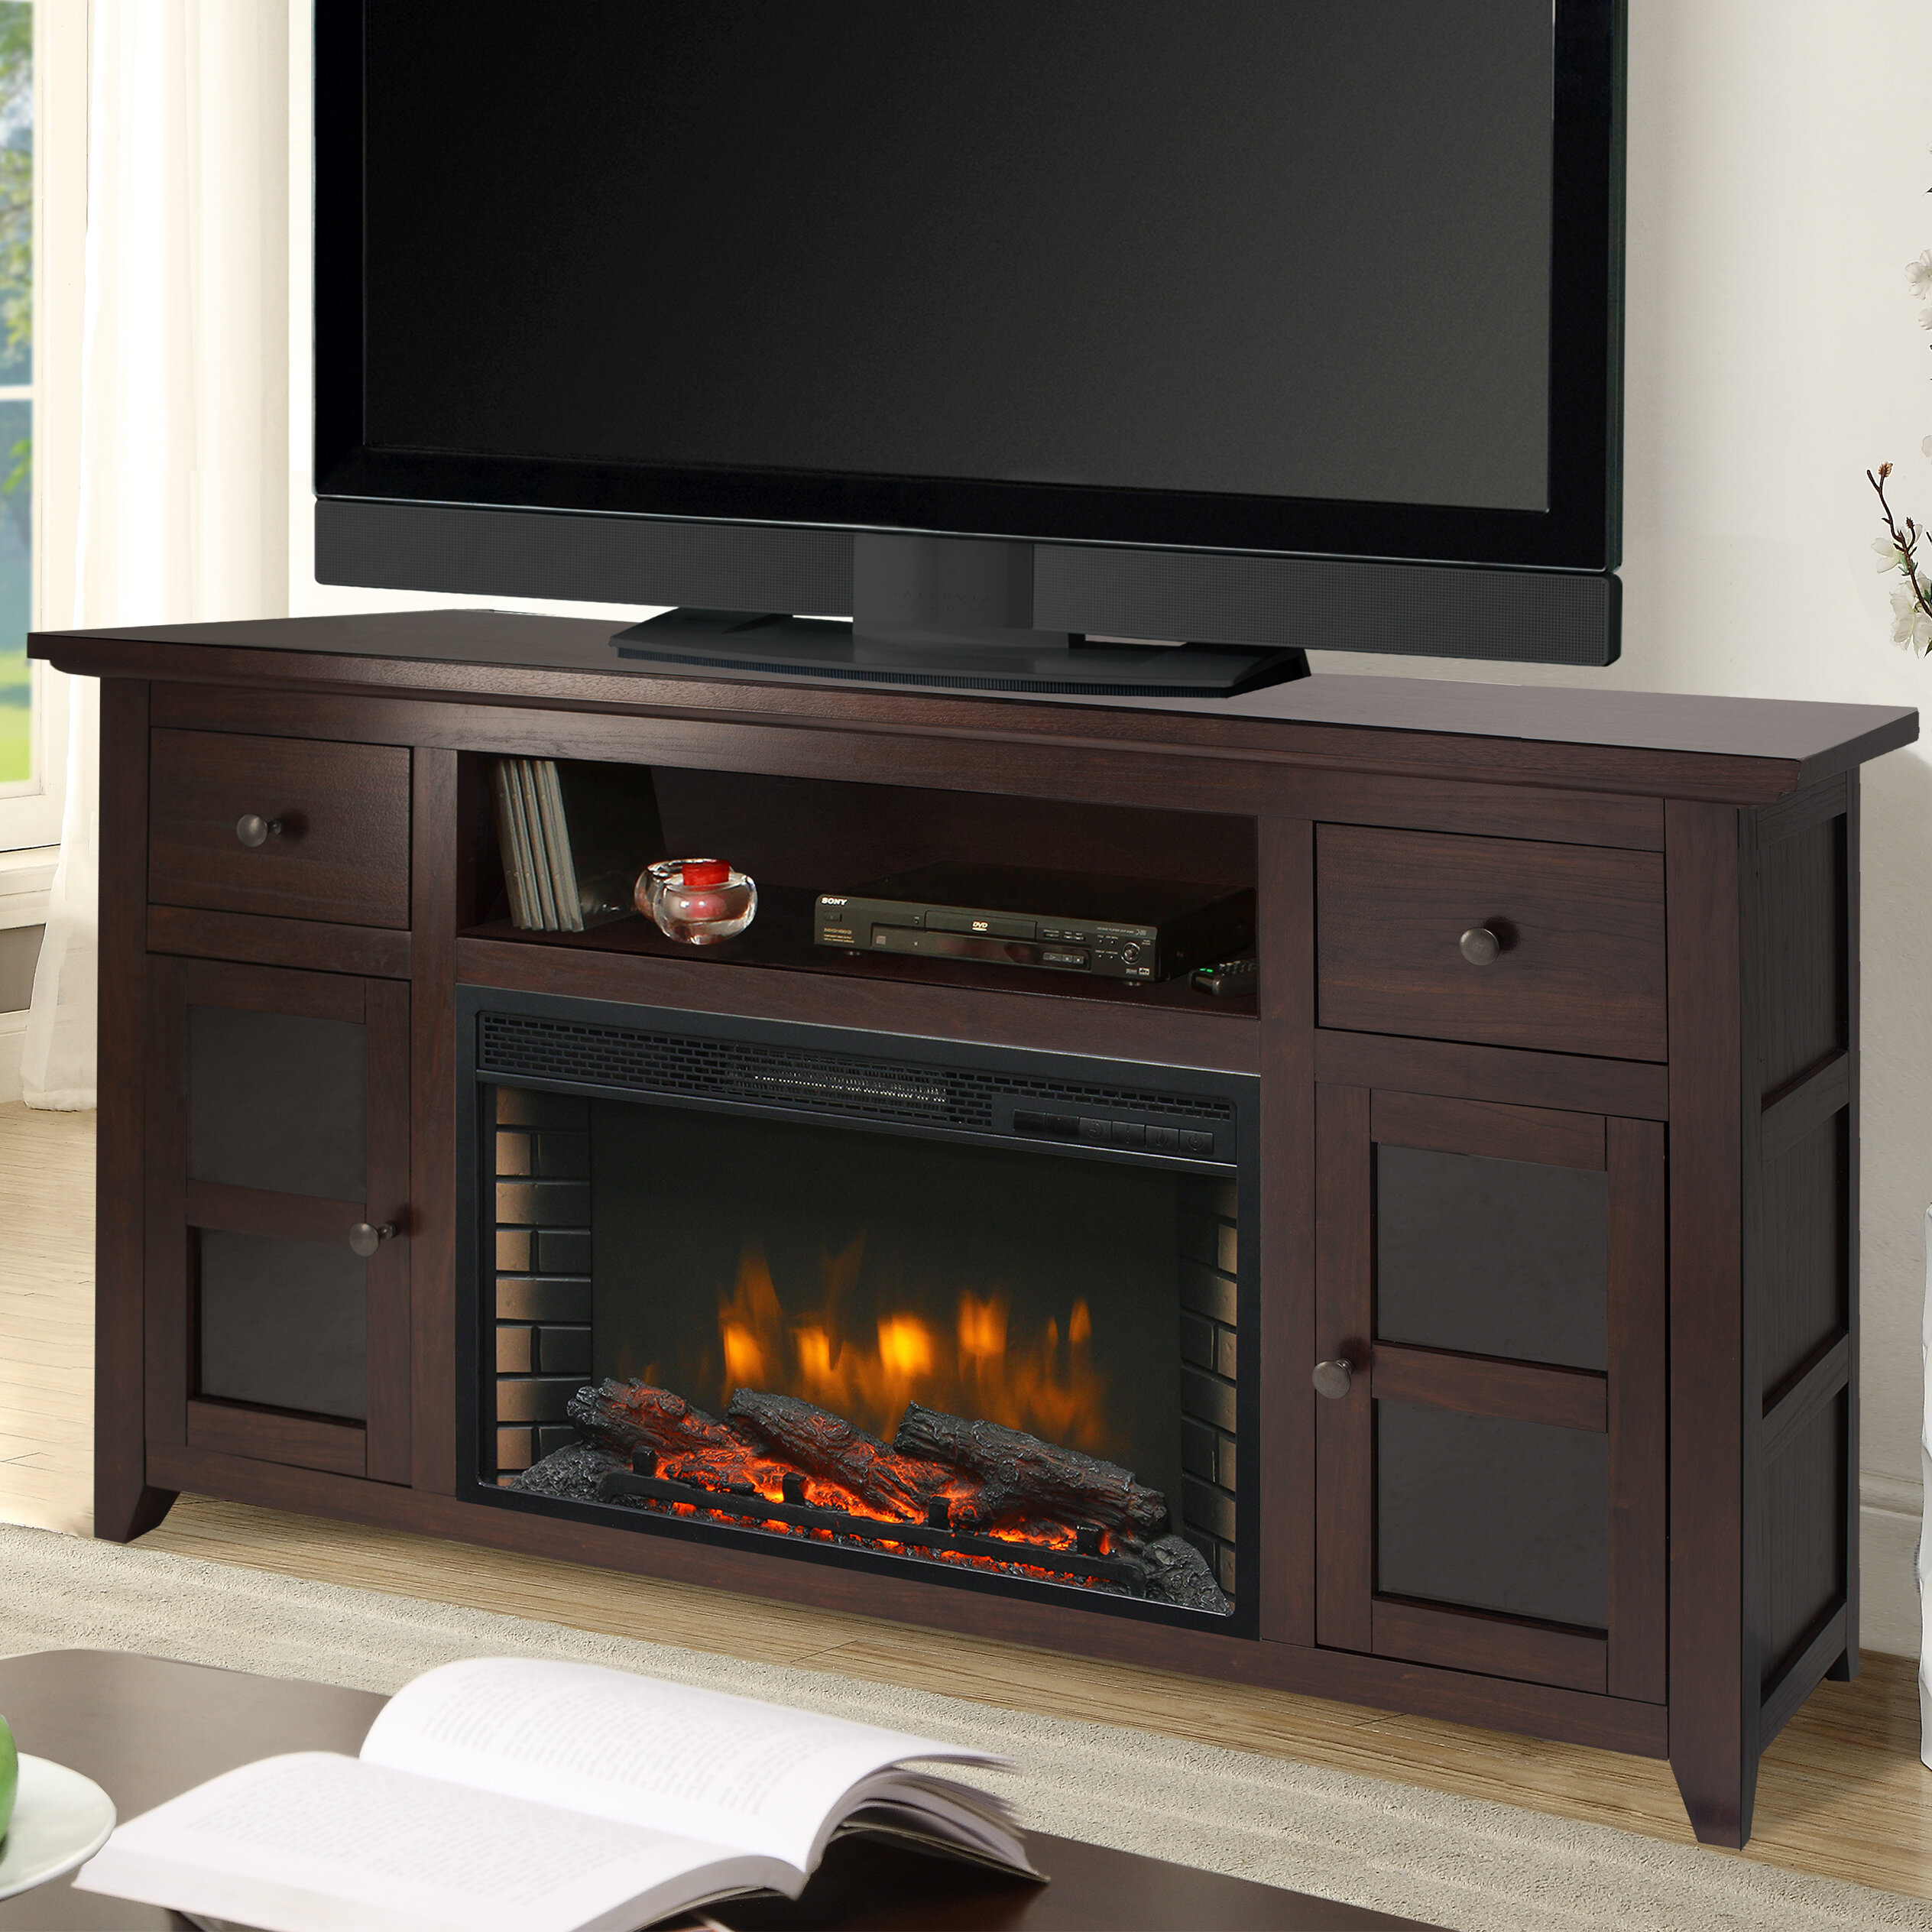 Winchester TV Stand for TVs up to 70" with Electric Fireplace Included